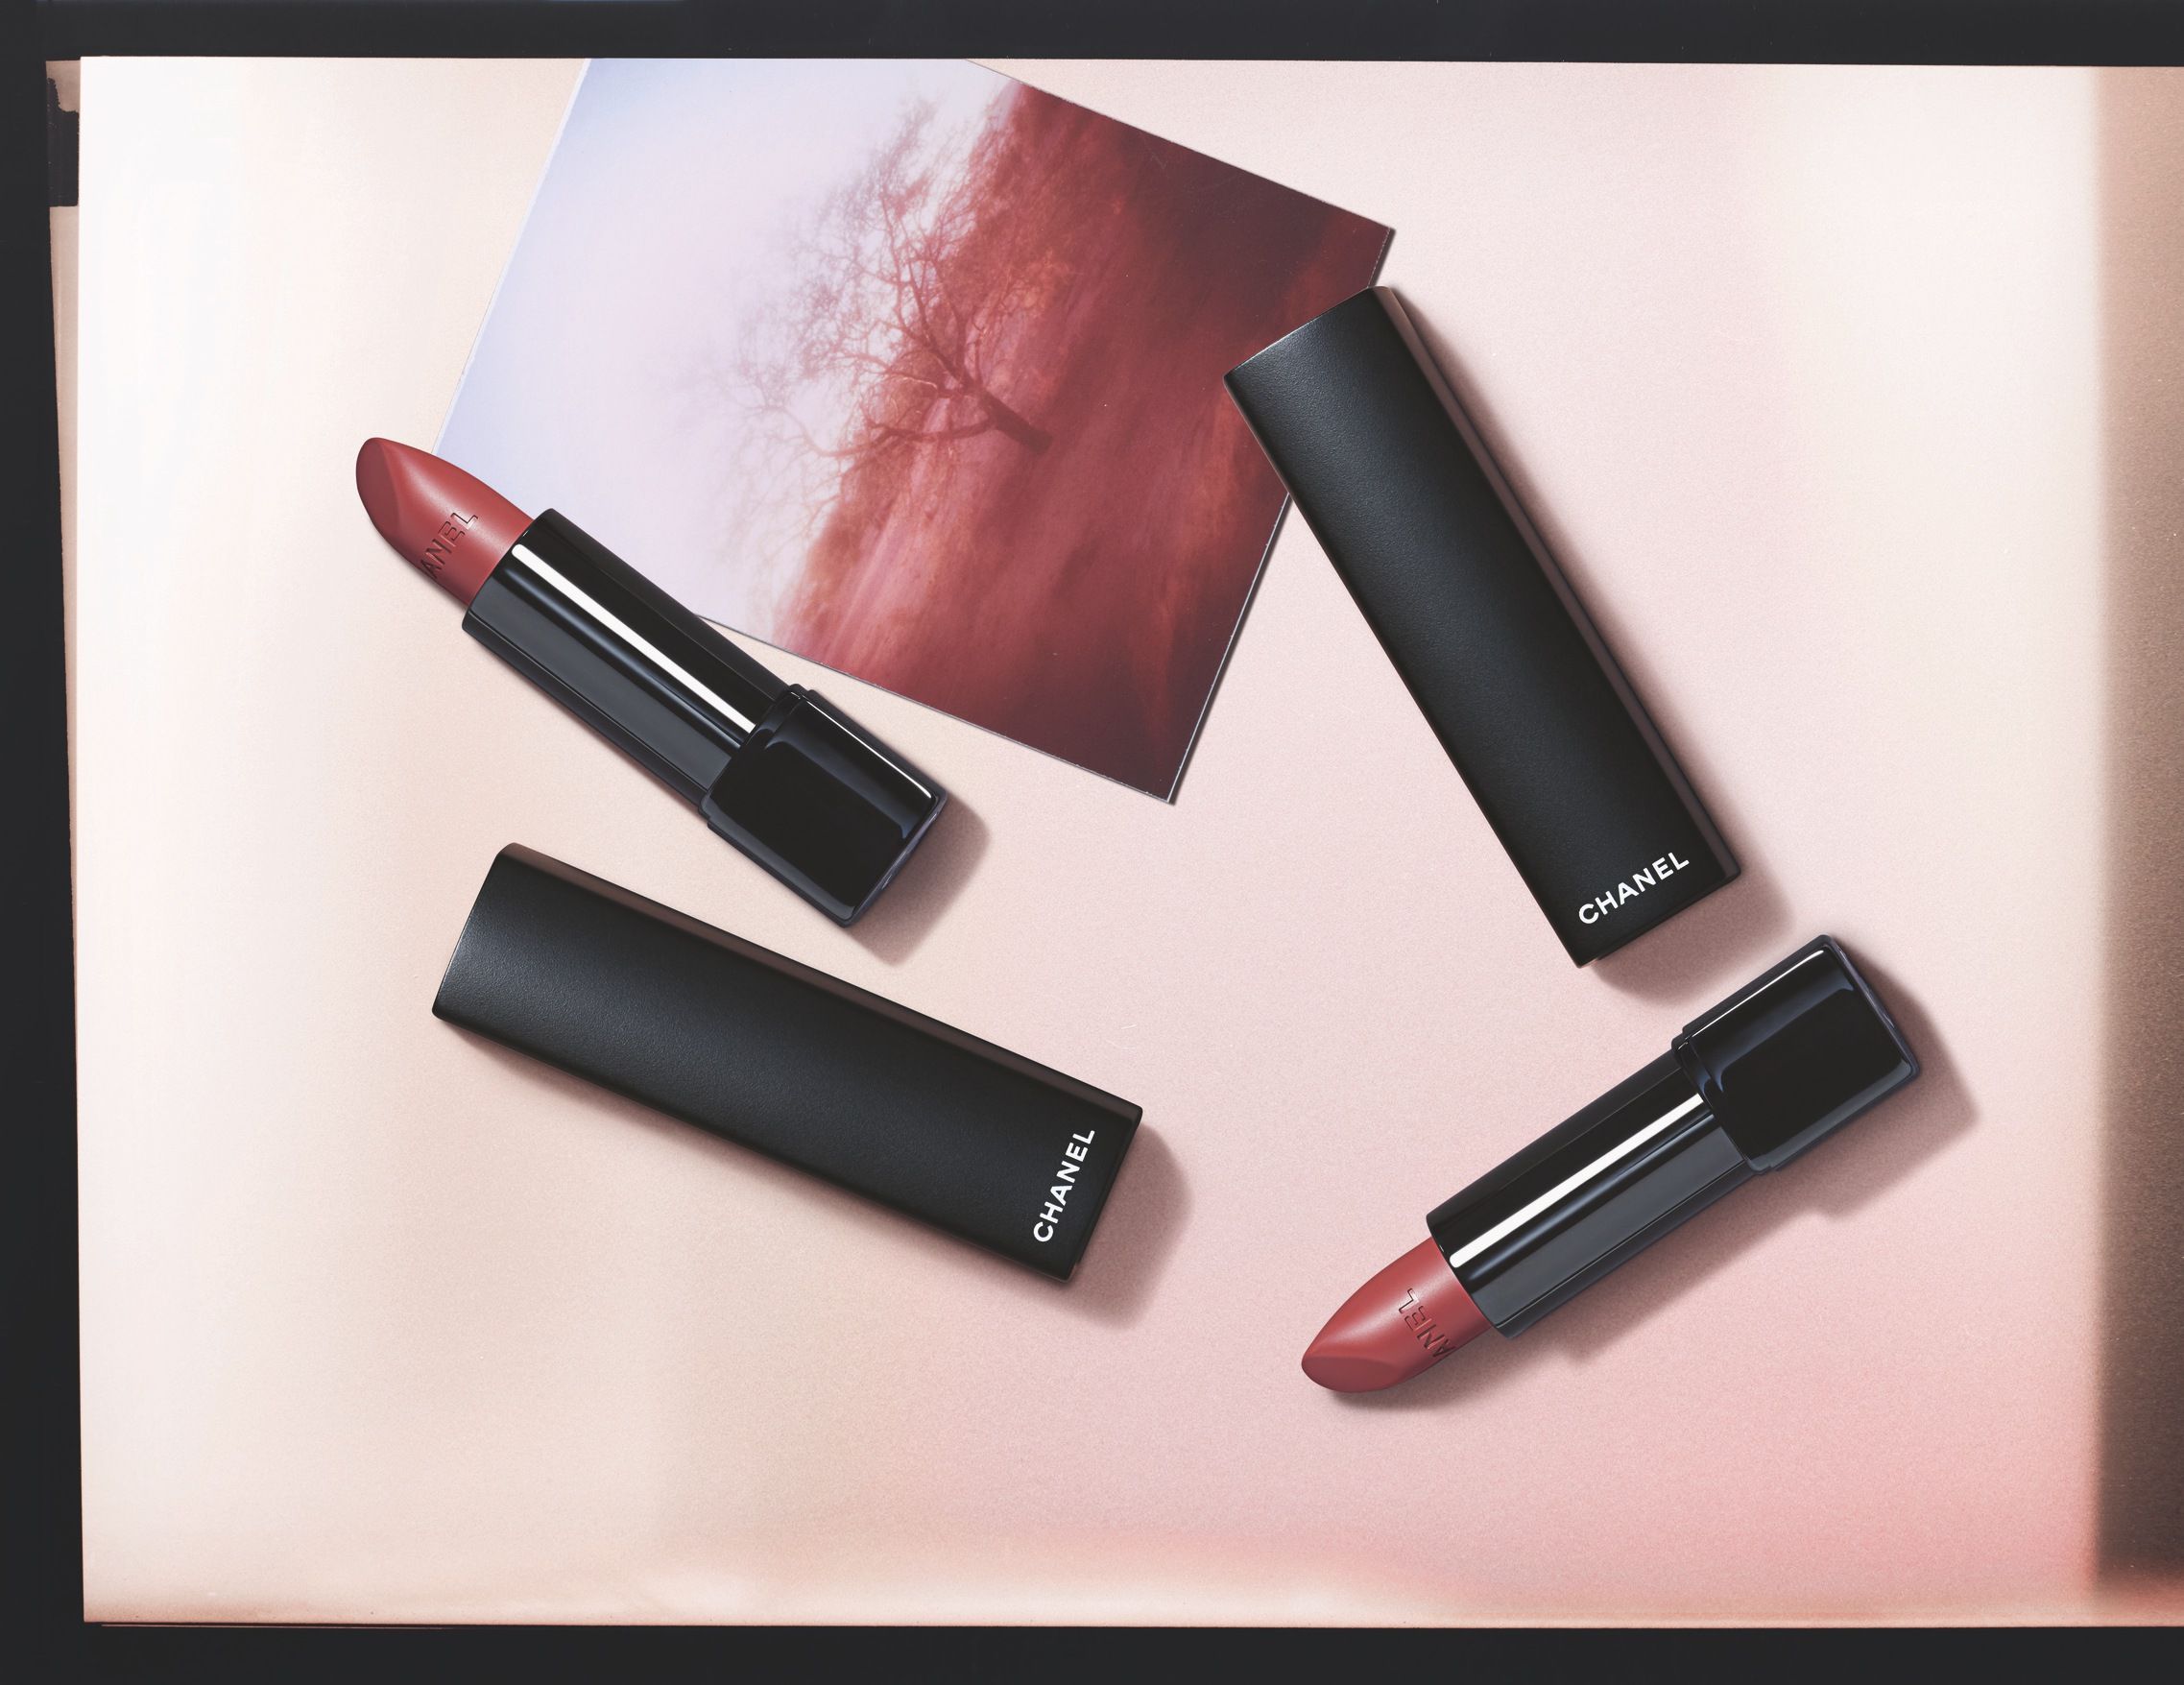 The Chanel Desert Dream collection boasts rich, wearable hues